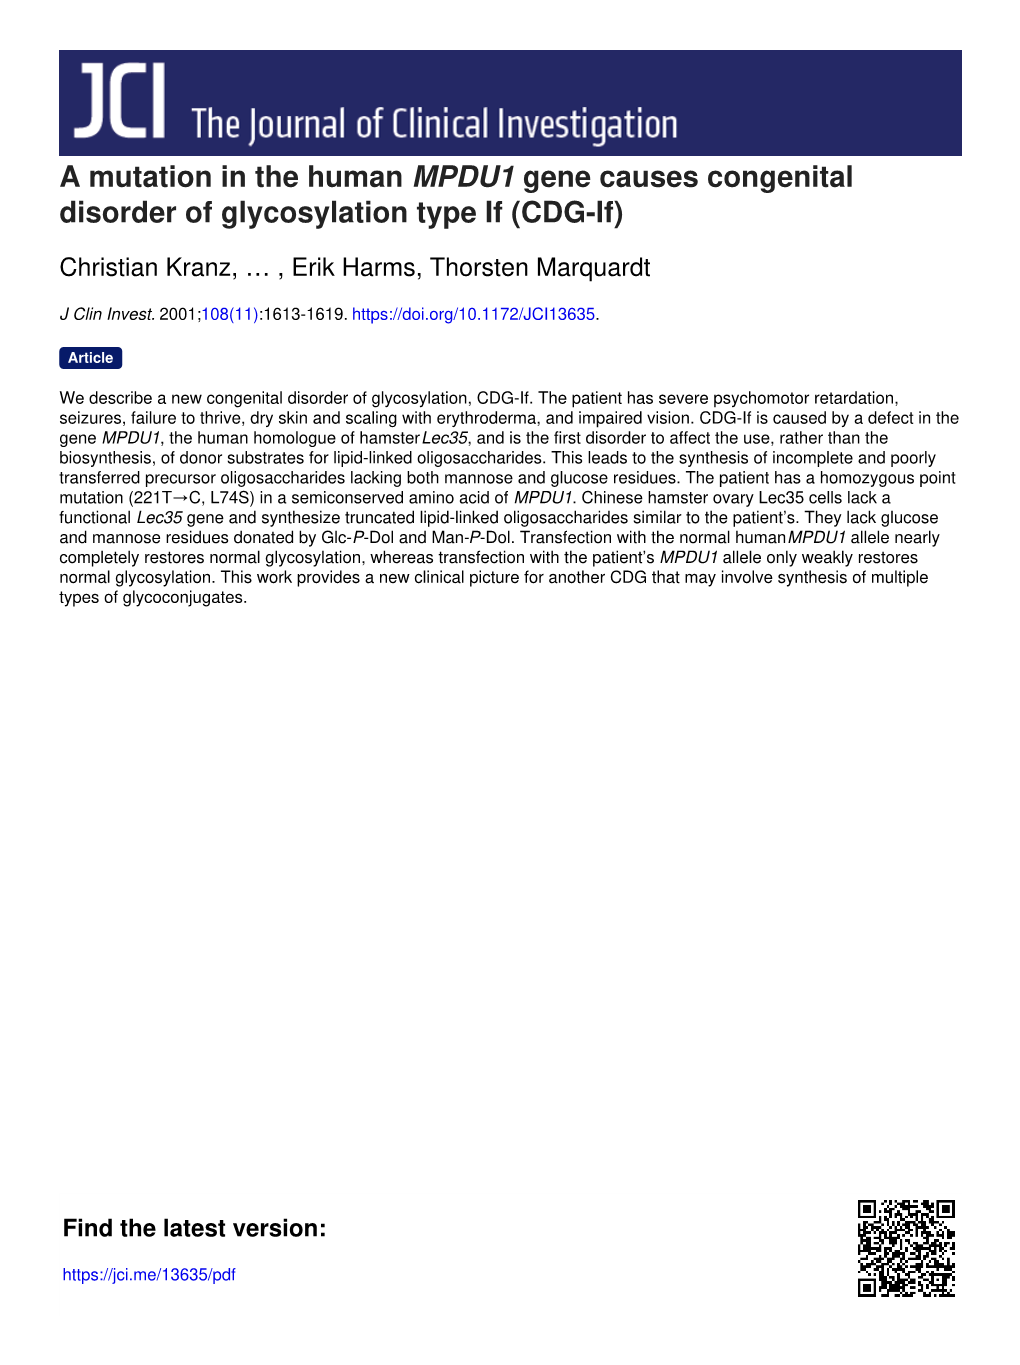 A Mutation in the Human MPDU1 Gene Causes Congenital Disorder of Glycosylation Type If (CDG-If)